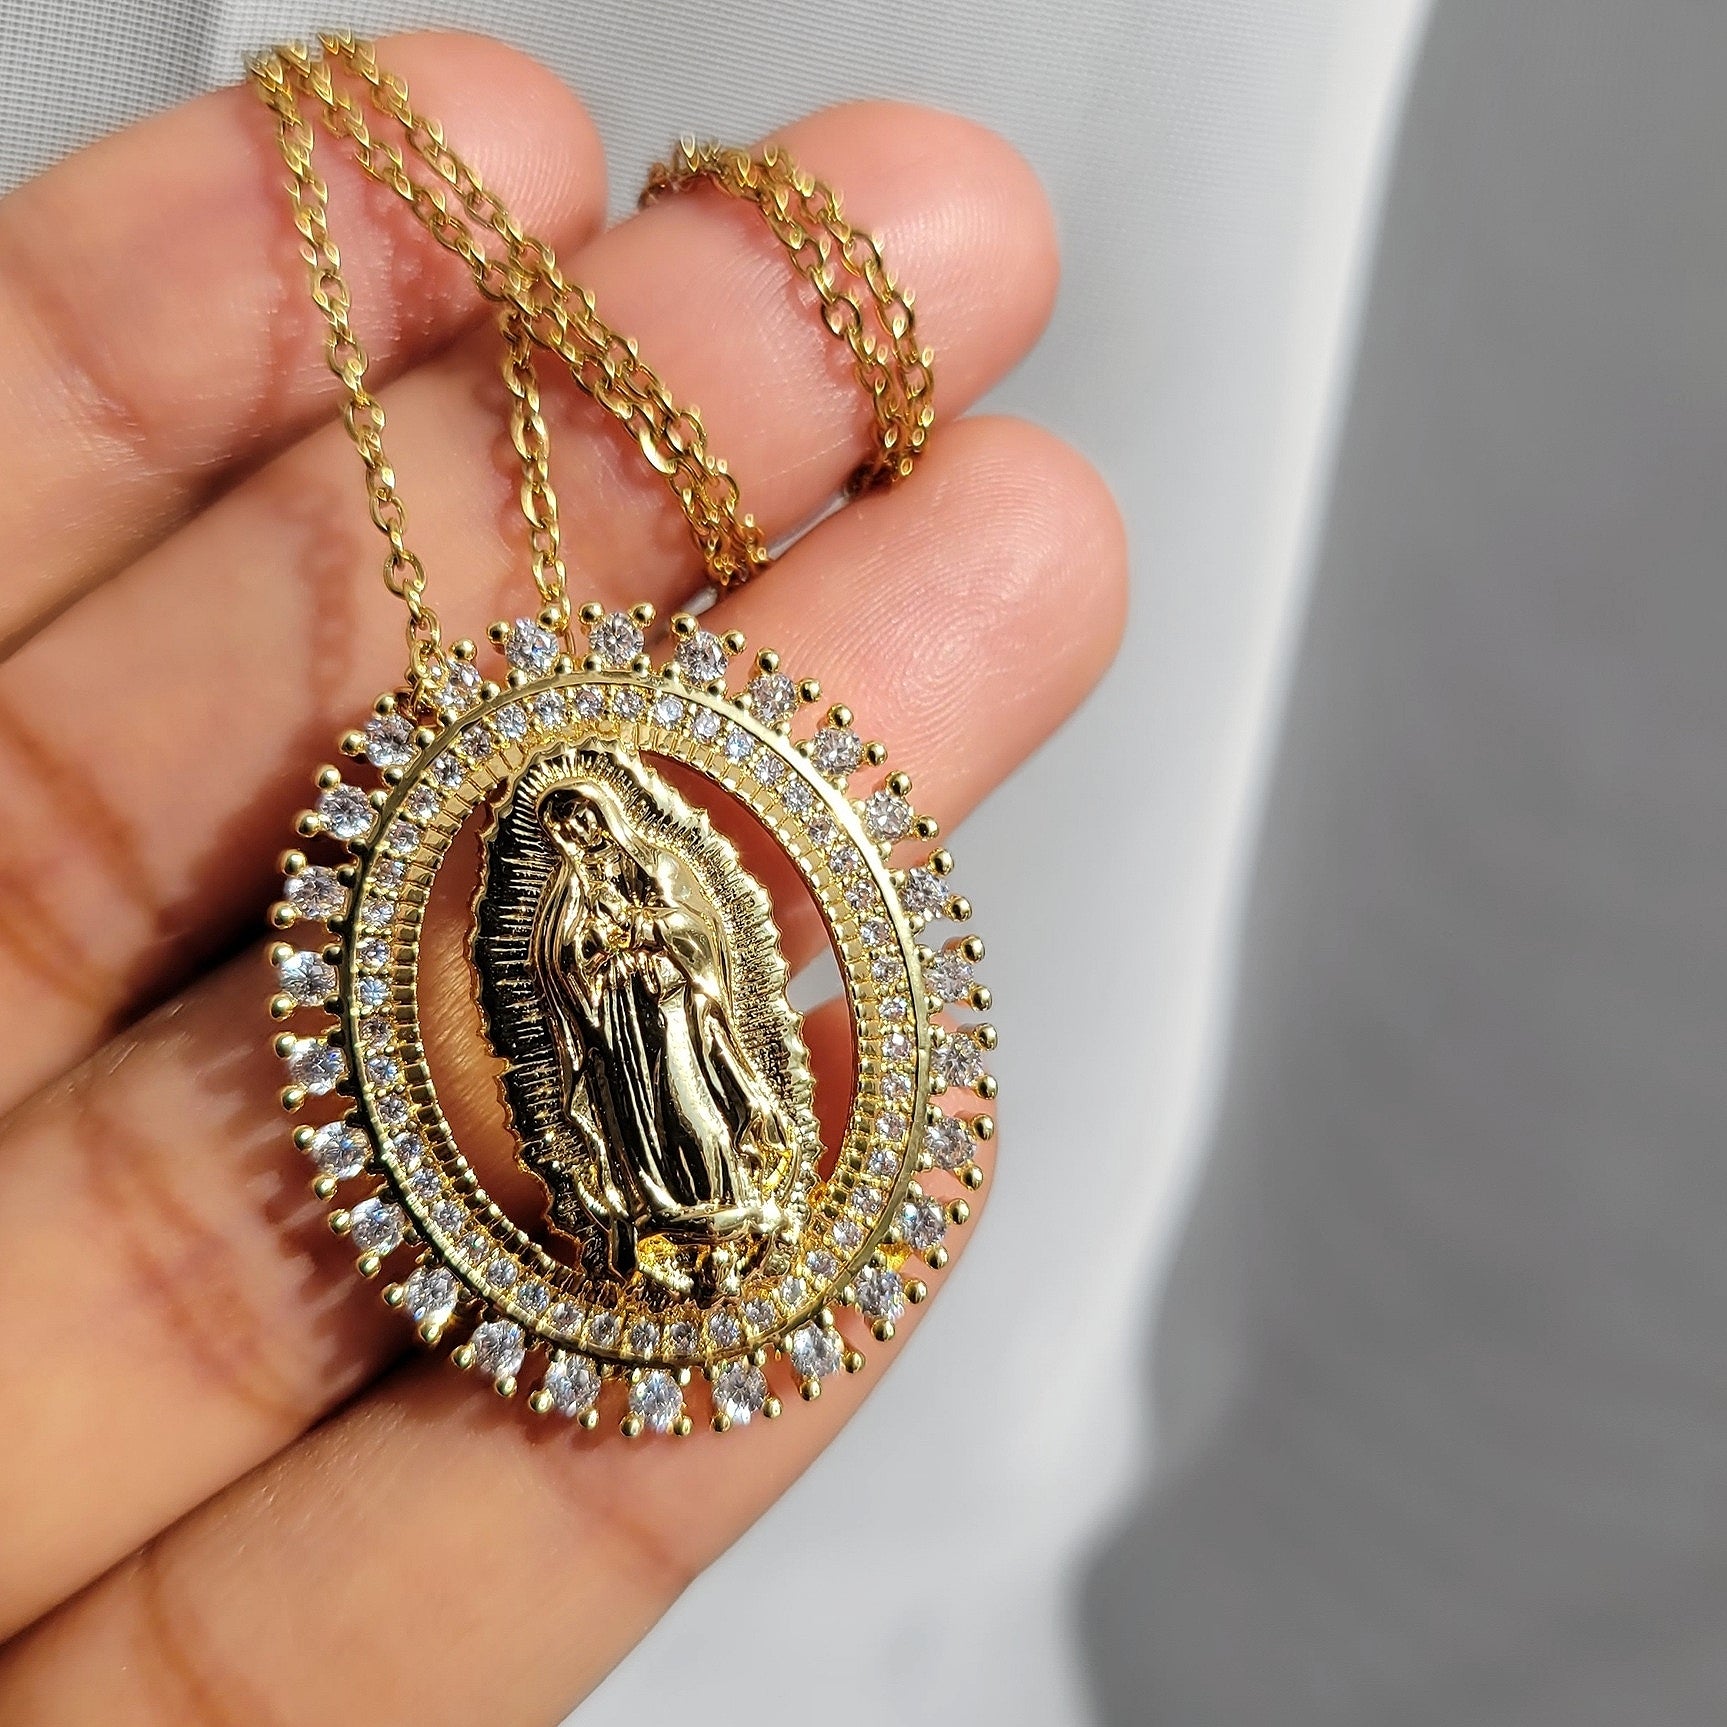 Our Lady Of Guadalupe Pendant Necklace in Gold (Medium) 1.89 in.  (Yellow/Rose/White)